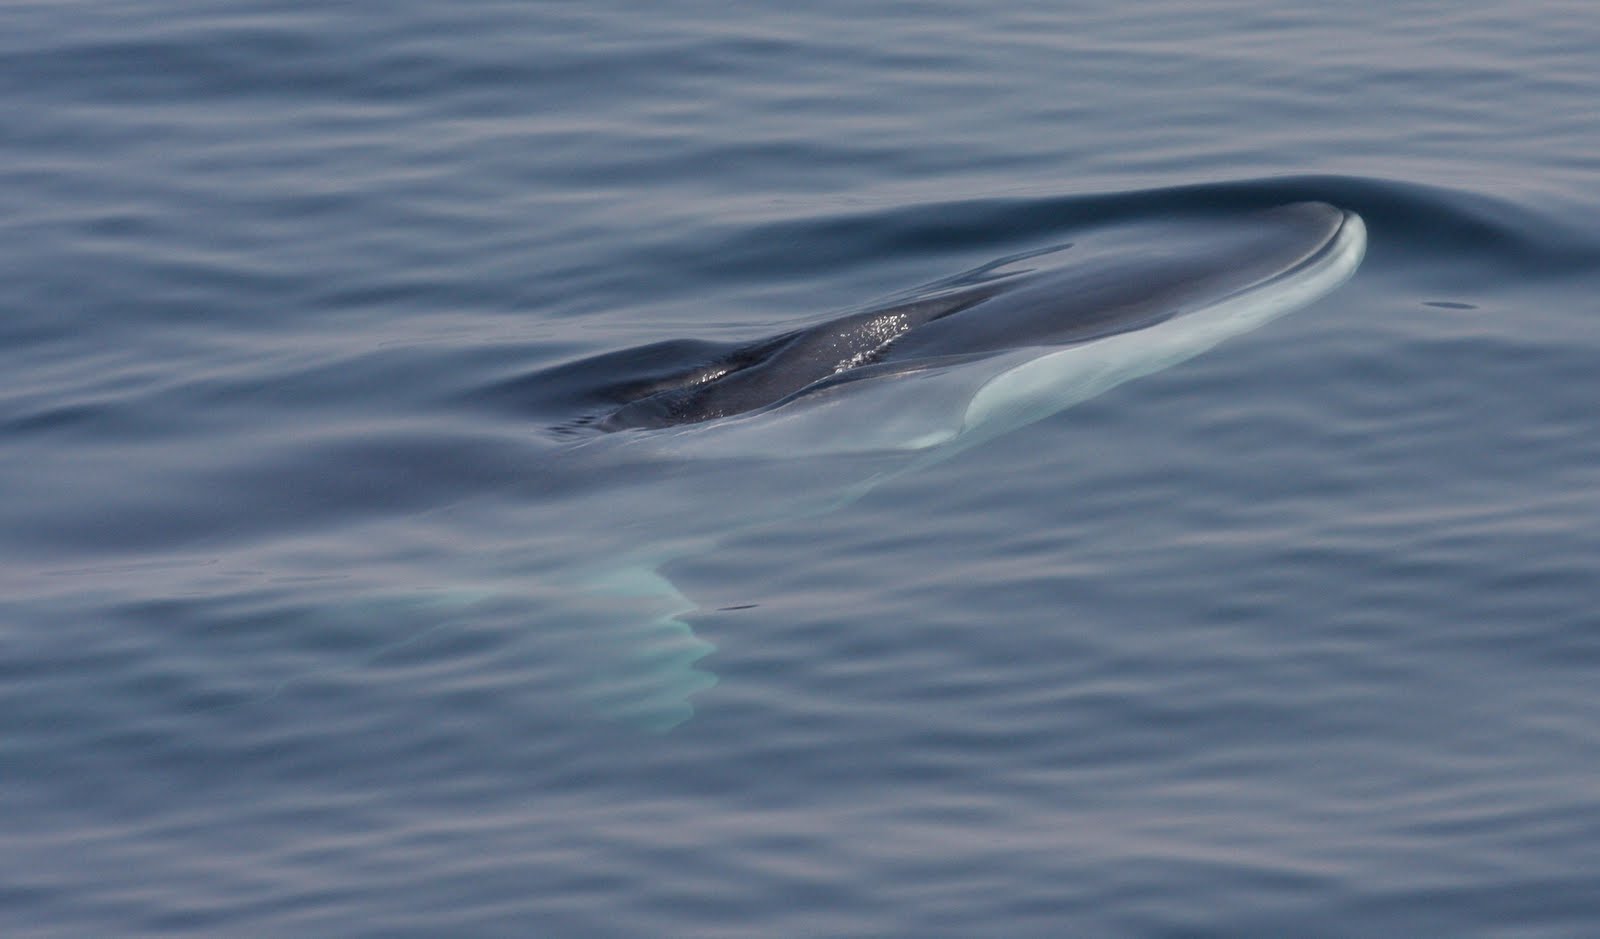 Fin whale surfacing next to the boat